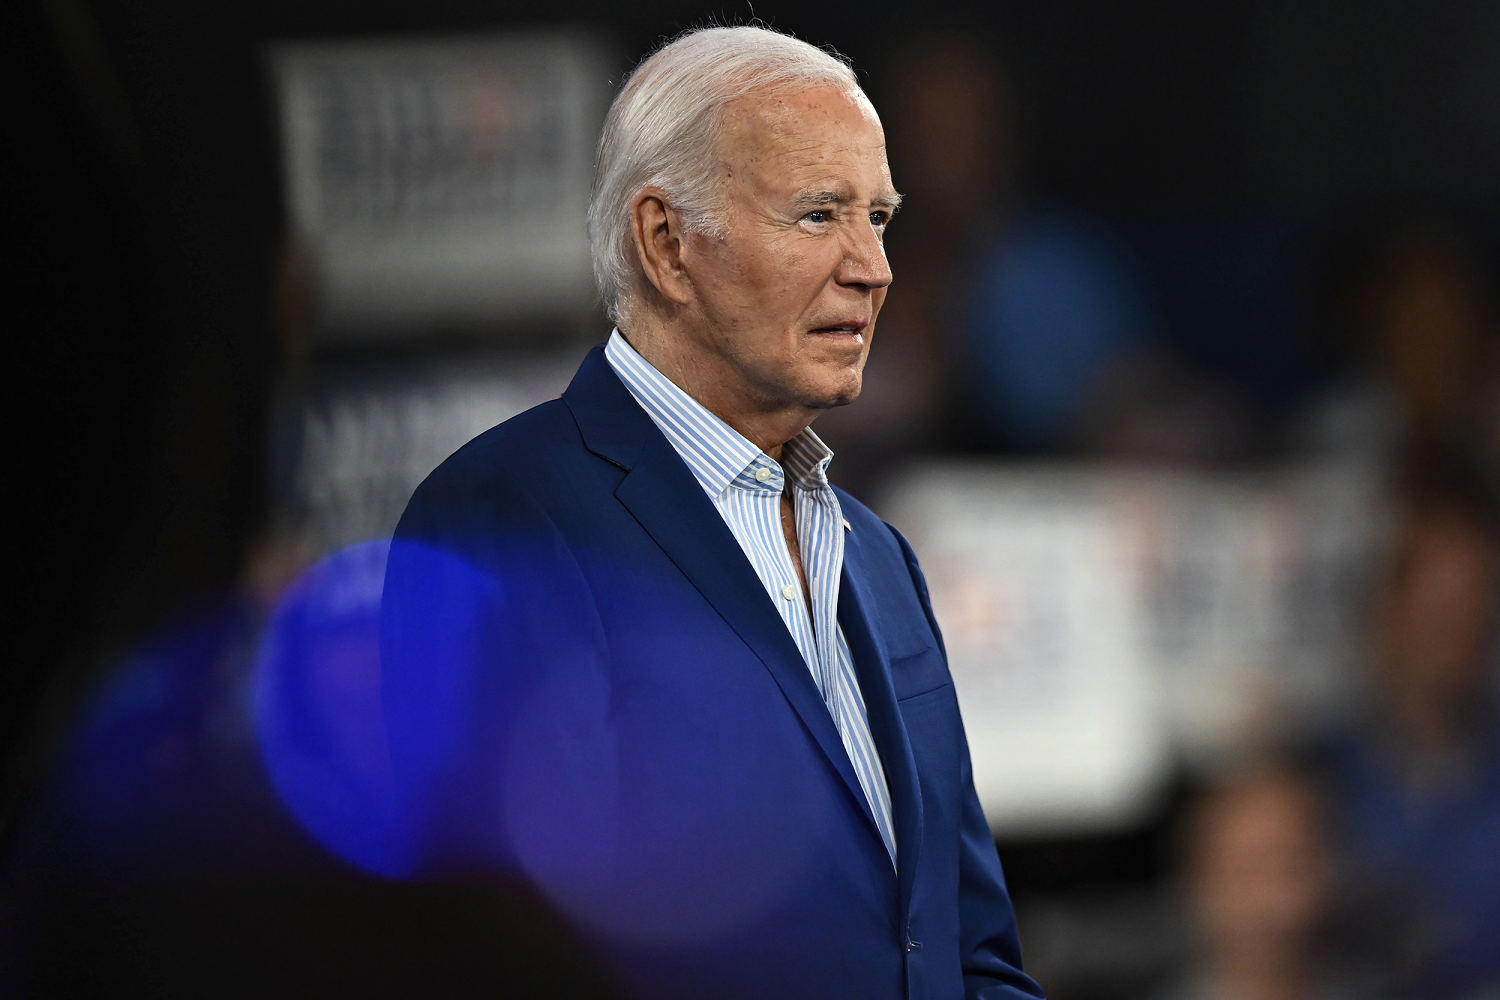 Biden says he saw a doctor after the debate and acknowledges: 'I screwed up'